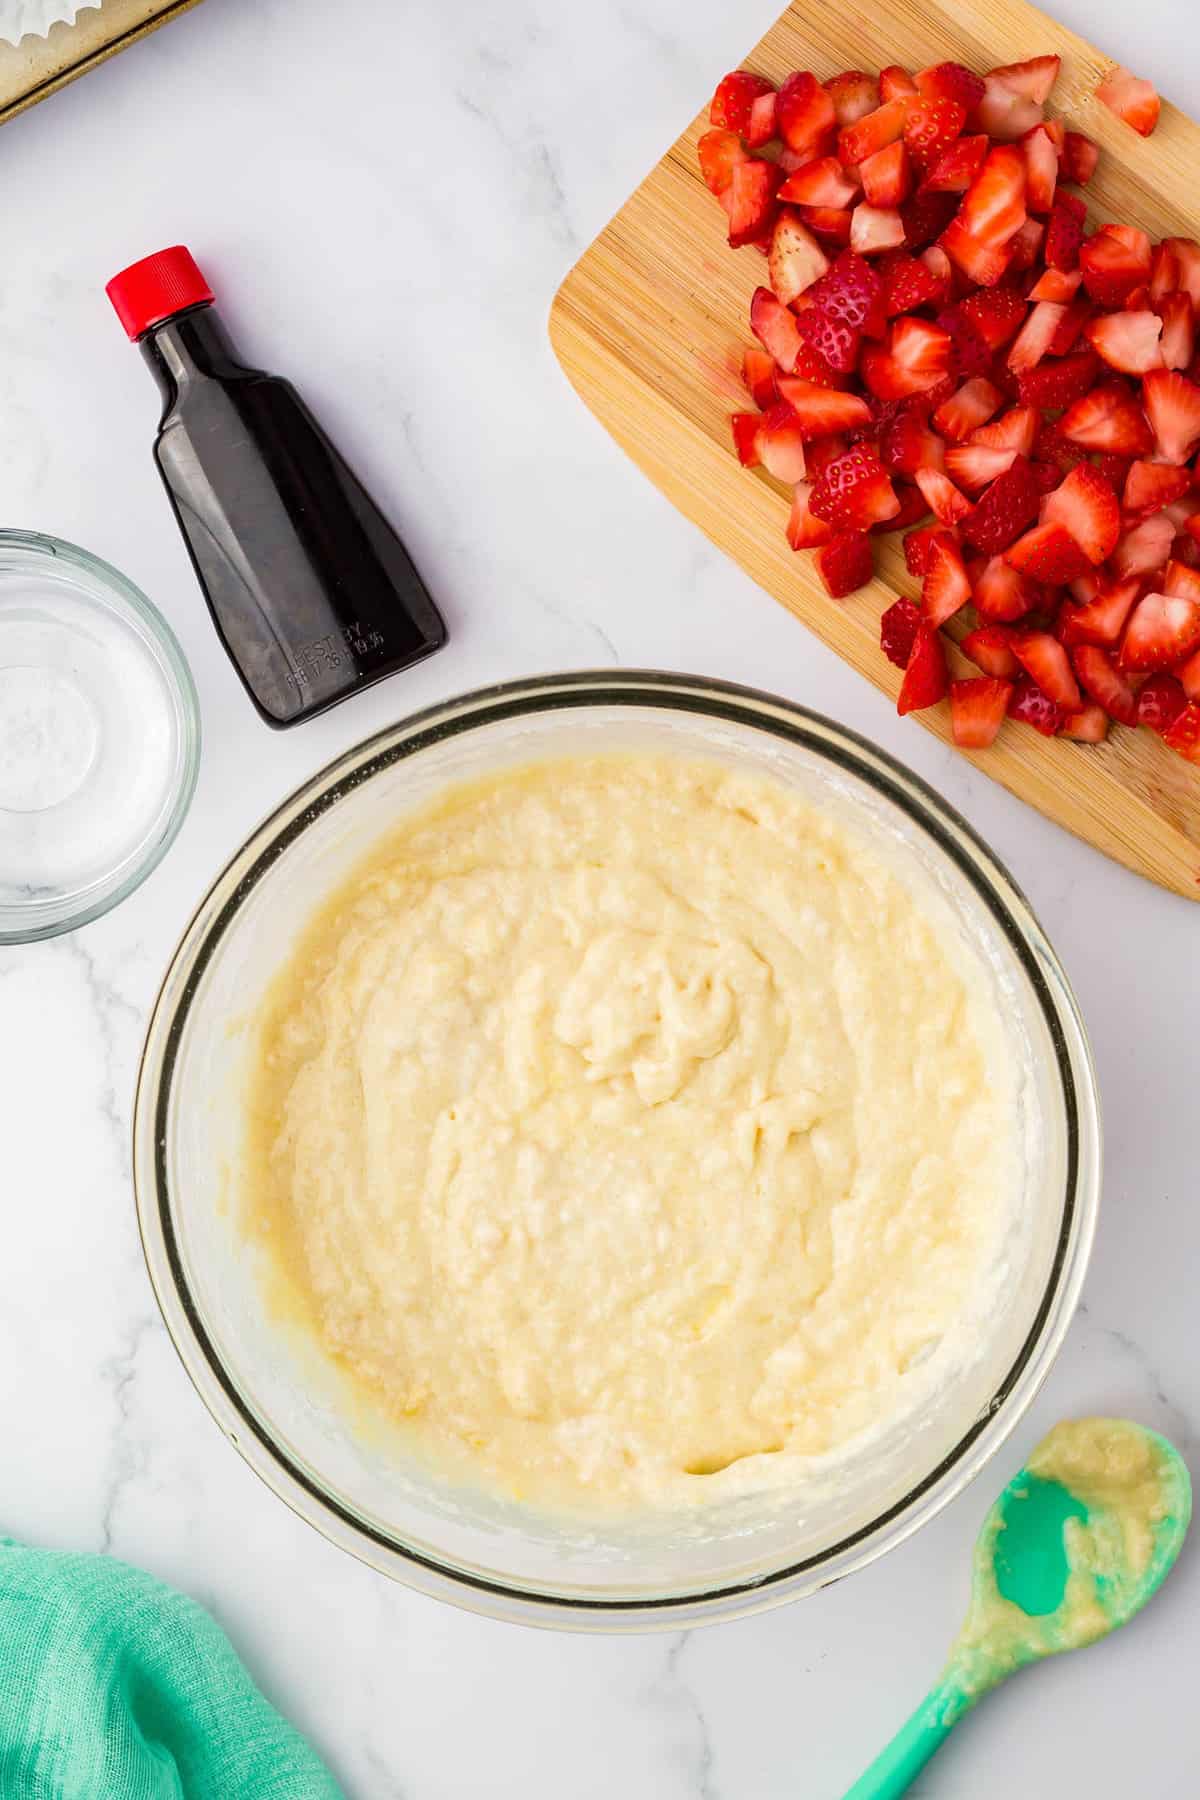 Mixed Muffin Batter for Strawberry Muffins